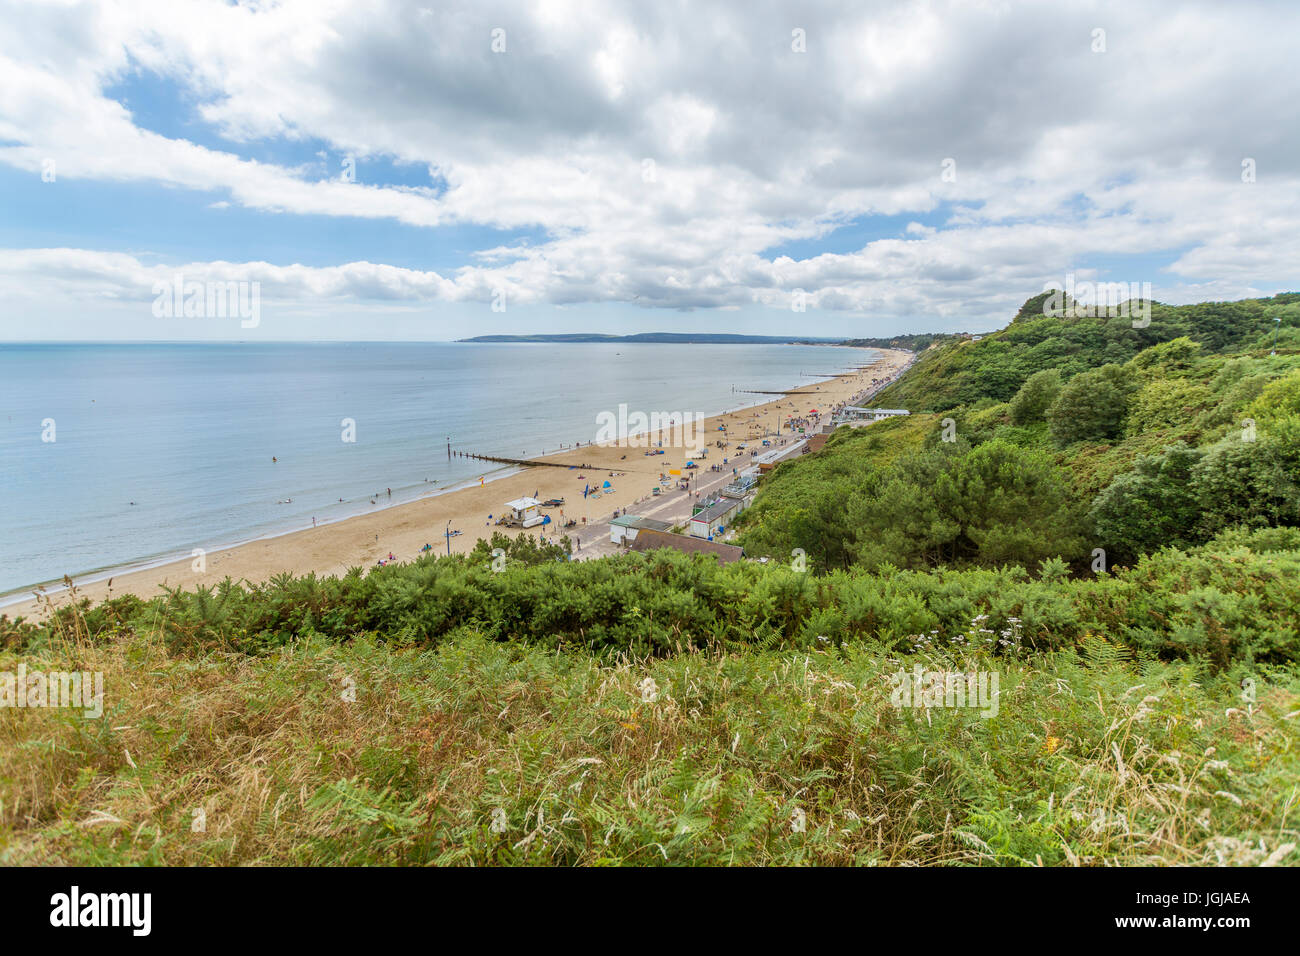 View from the cliff tops at Durley Chine in Bournemouth, looking towards Sandbanks. Stock Photo